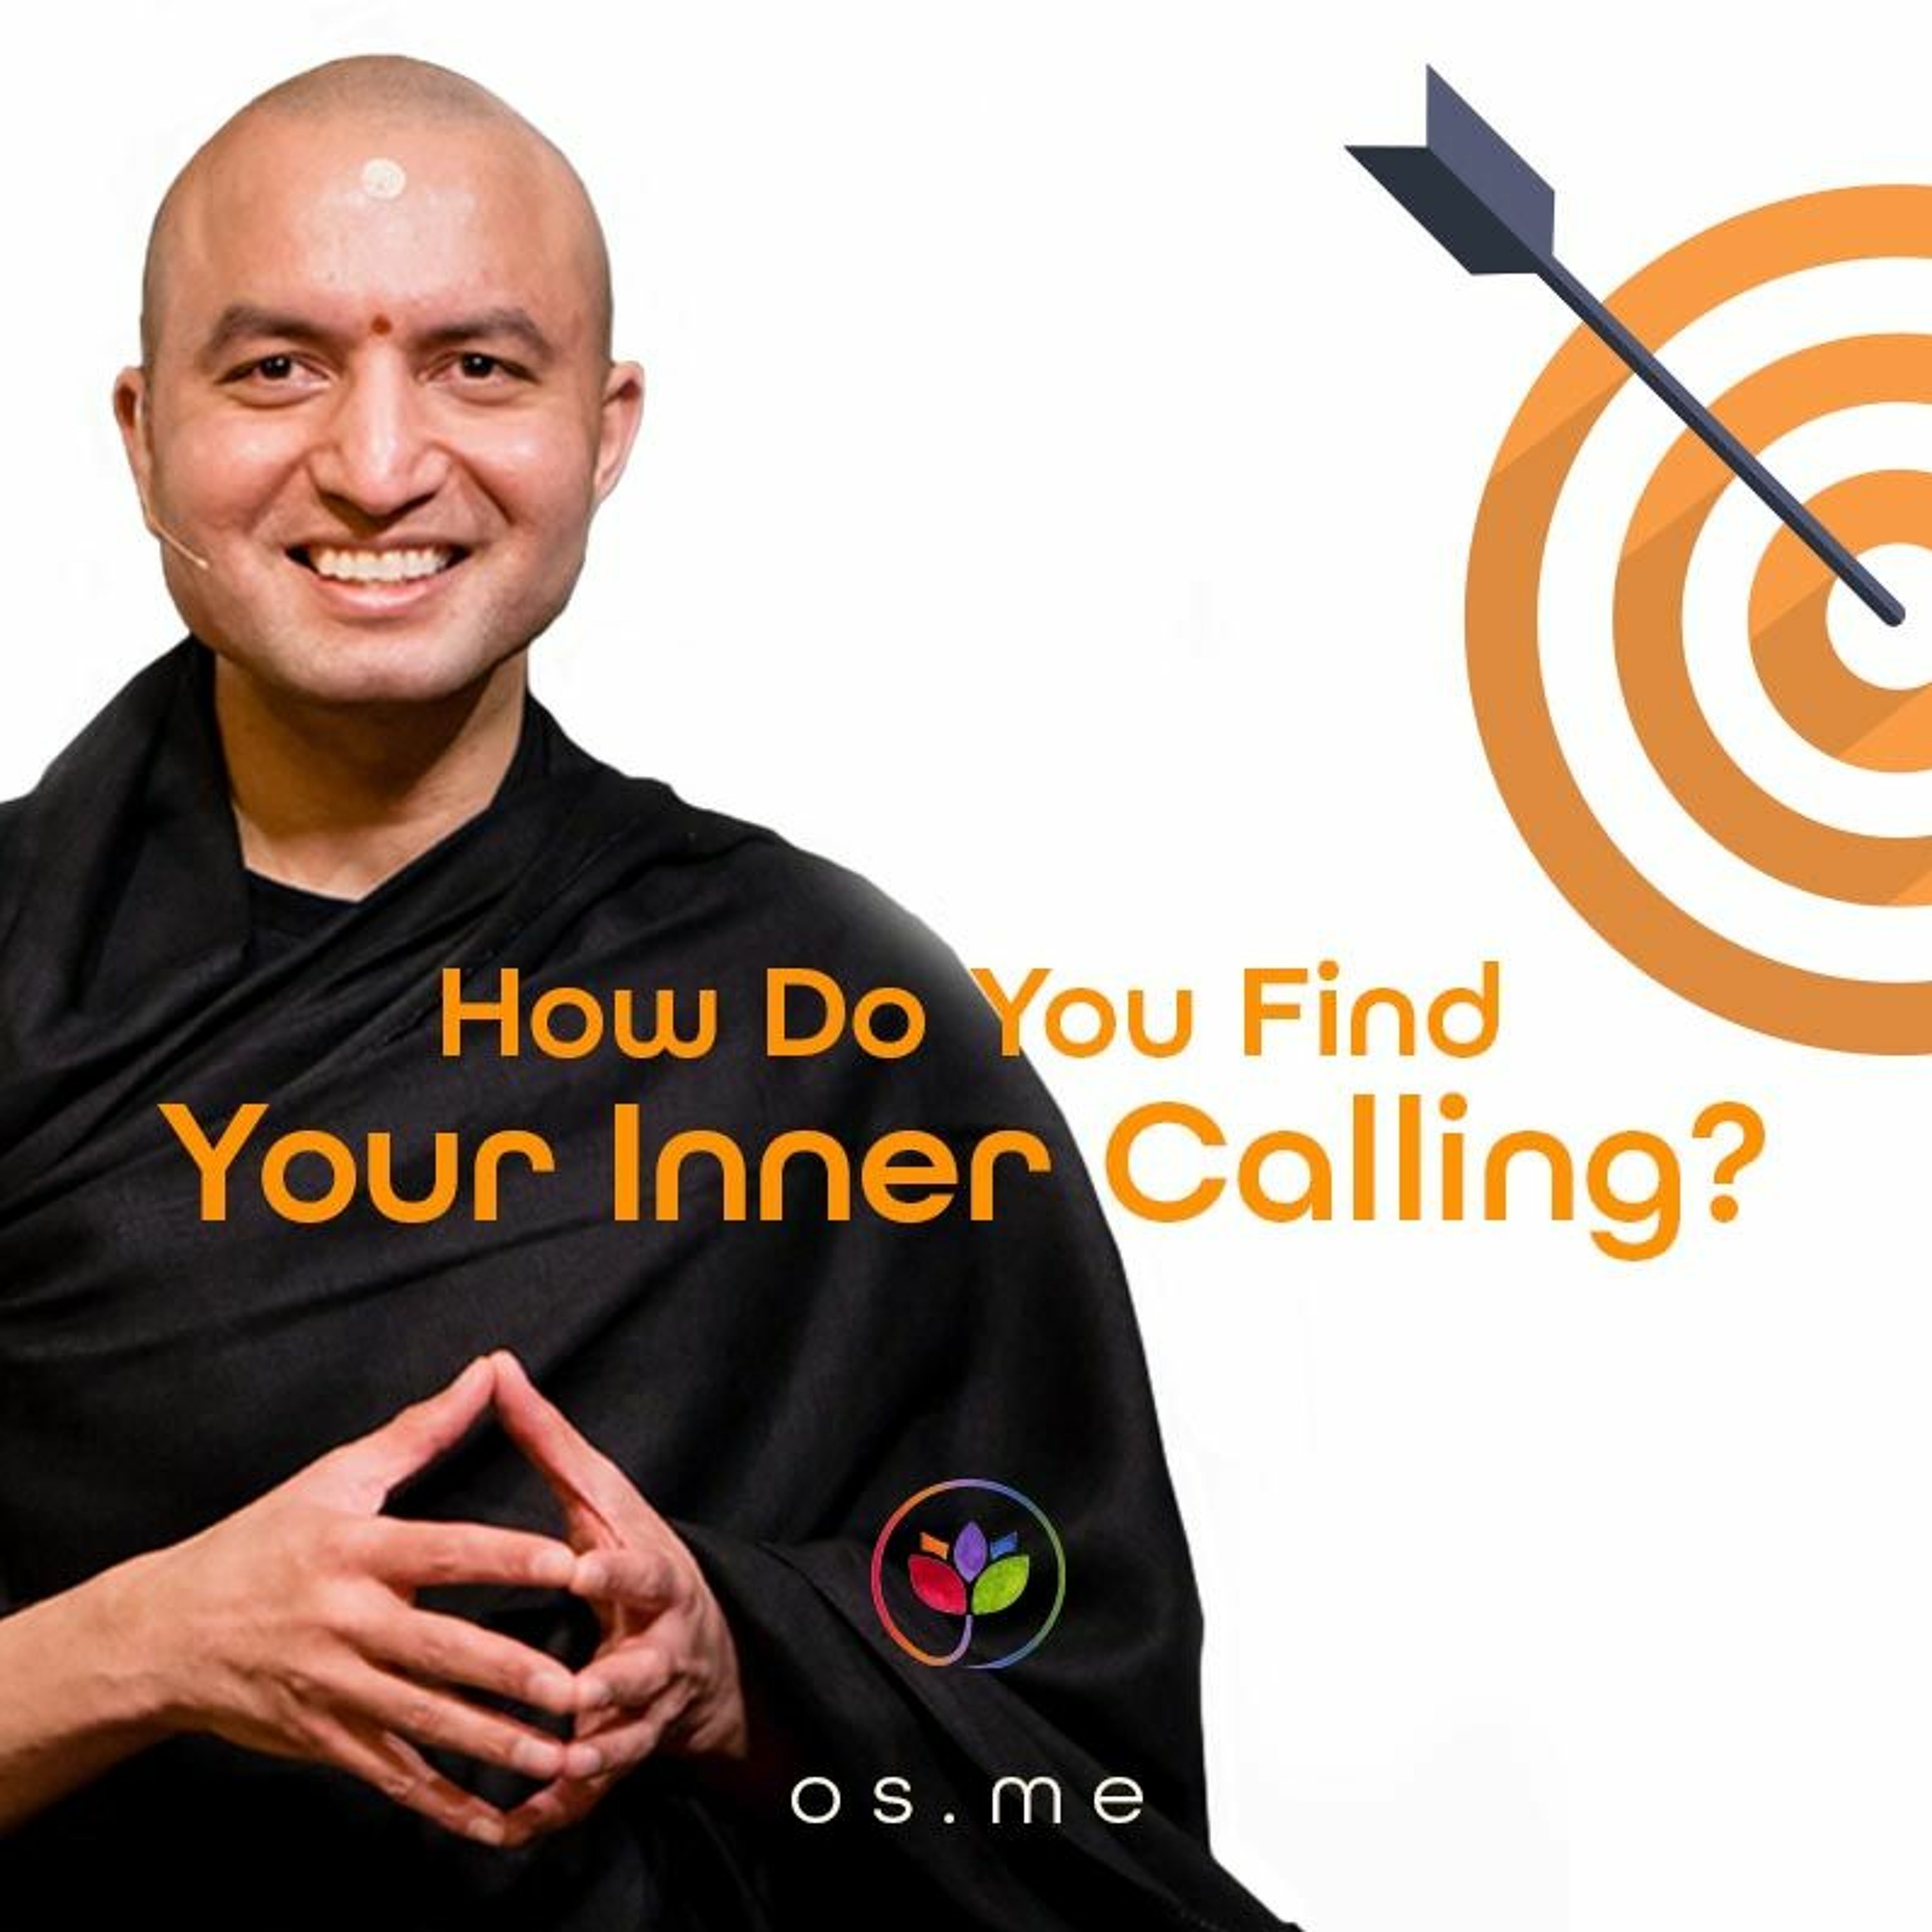 How Do You Find Your Inner Calling? - Om Swami [English]